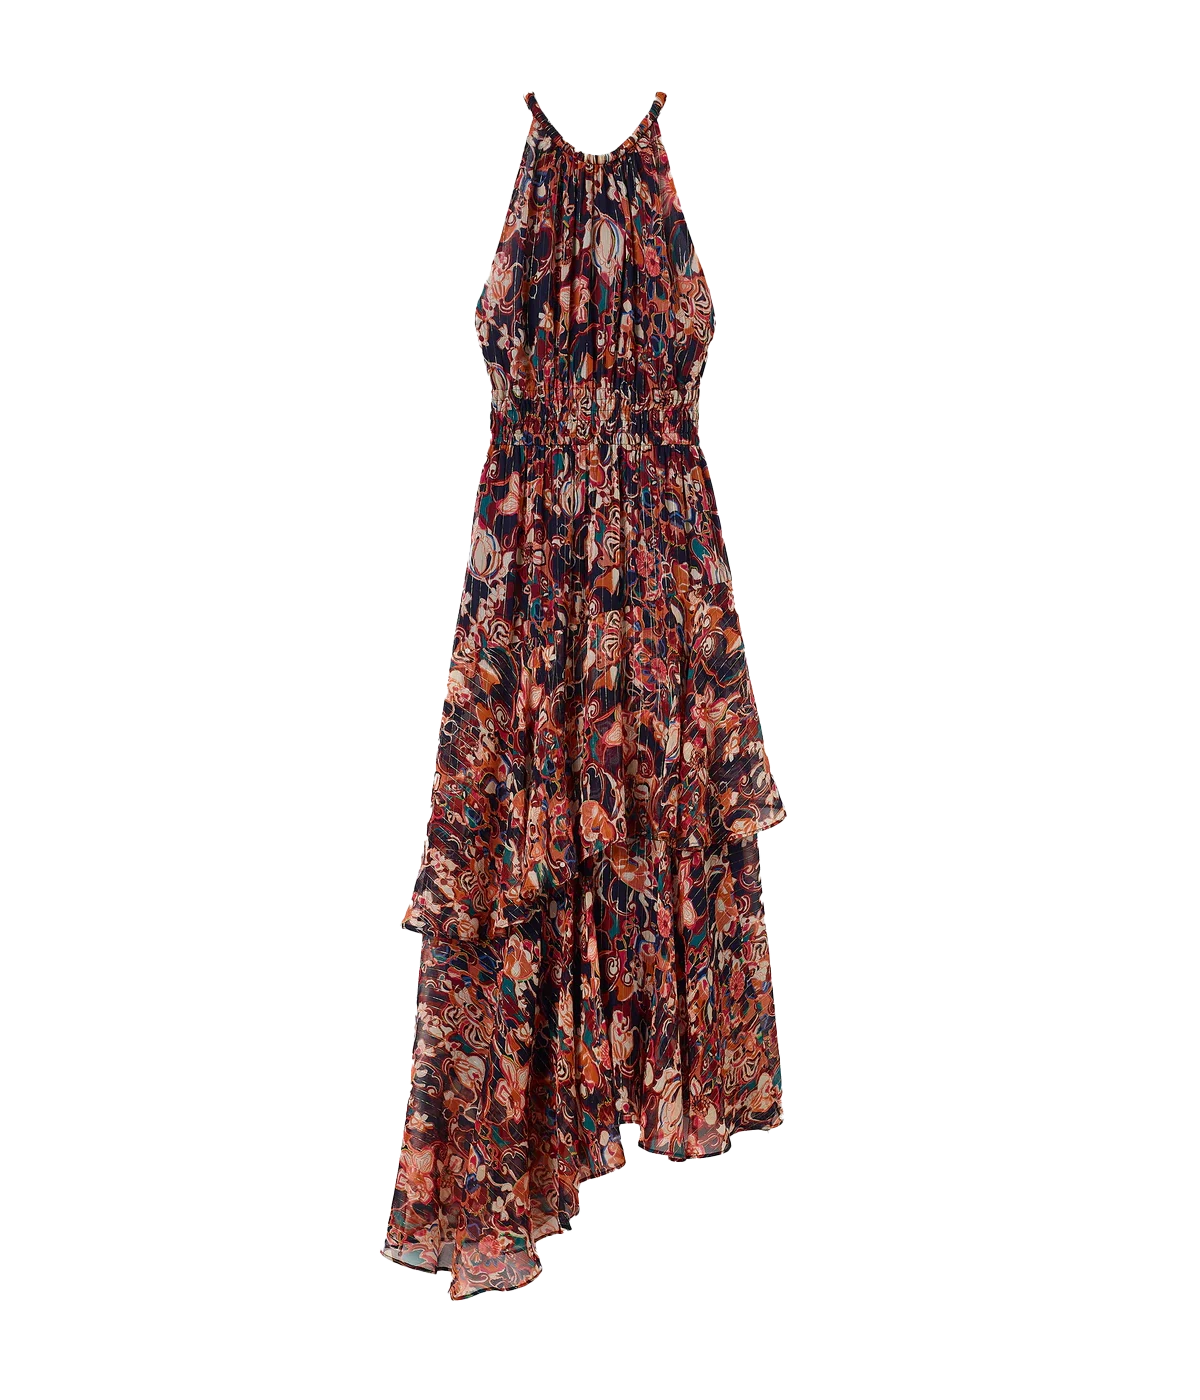 A halter neck style midi dress, featuring ruffle tiers and elasticated sinch waist detailing. In a red, orange and blue floral print with metallic thread. Made in USA, bra friendly, comfortable, long lunch, summer dress, lunch with girlfriends. 